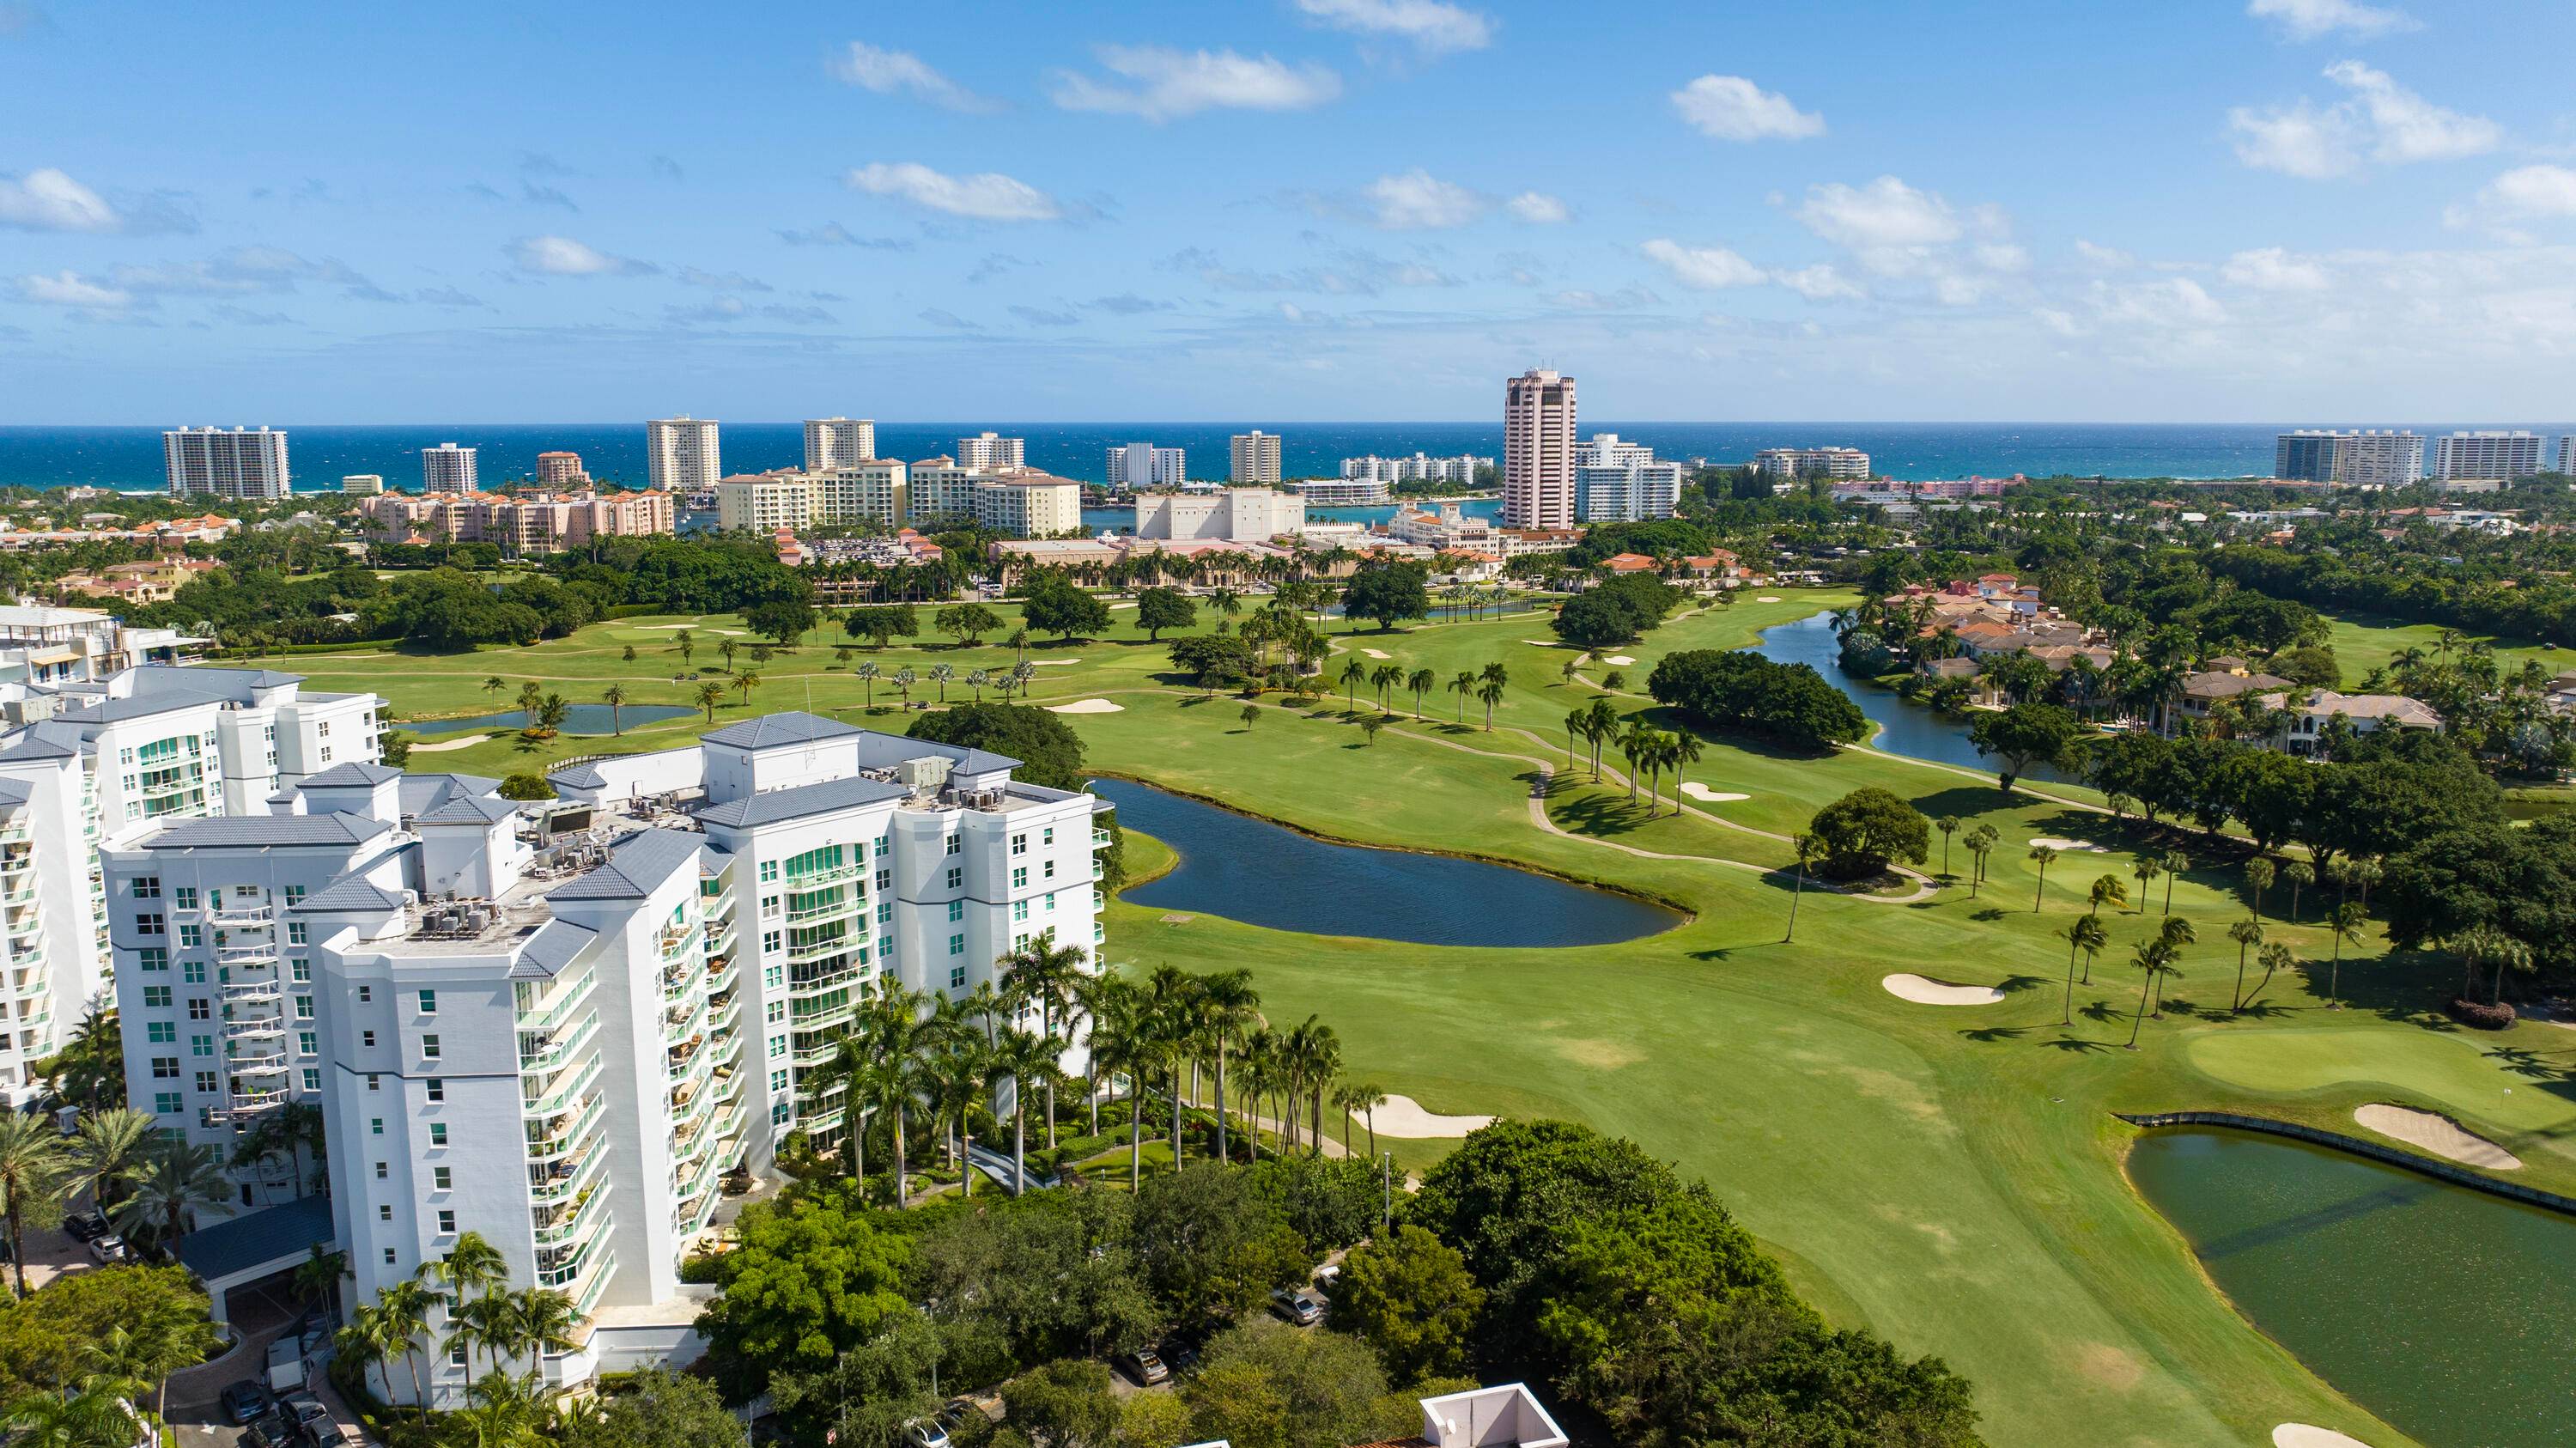 Overlooking the natural beauty of The Boca Raton's golf course and iconic resort, Townsend Place offers the perfect centrally located downtown lifestyle.